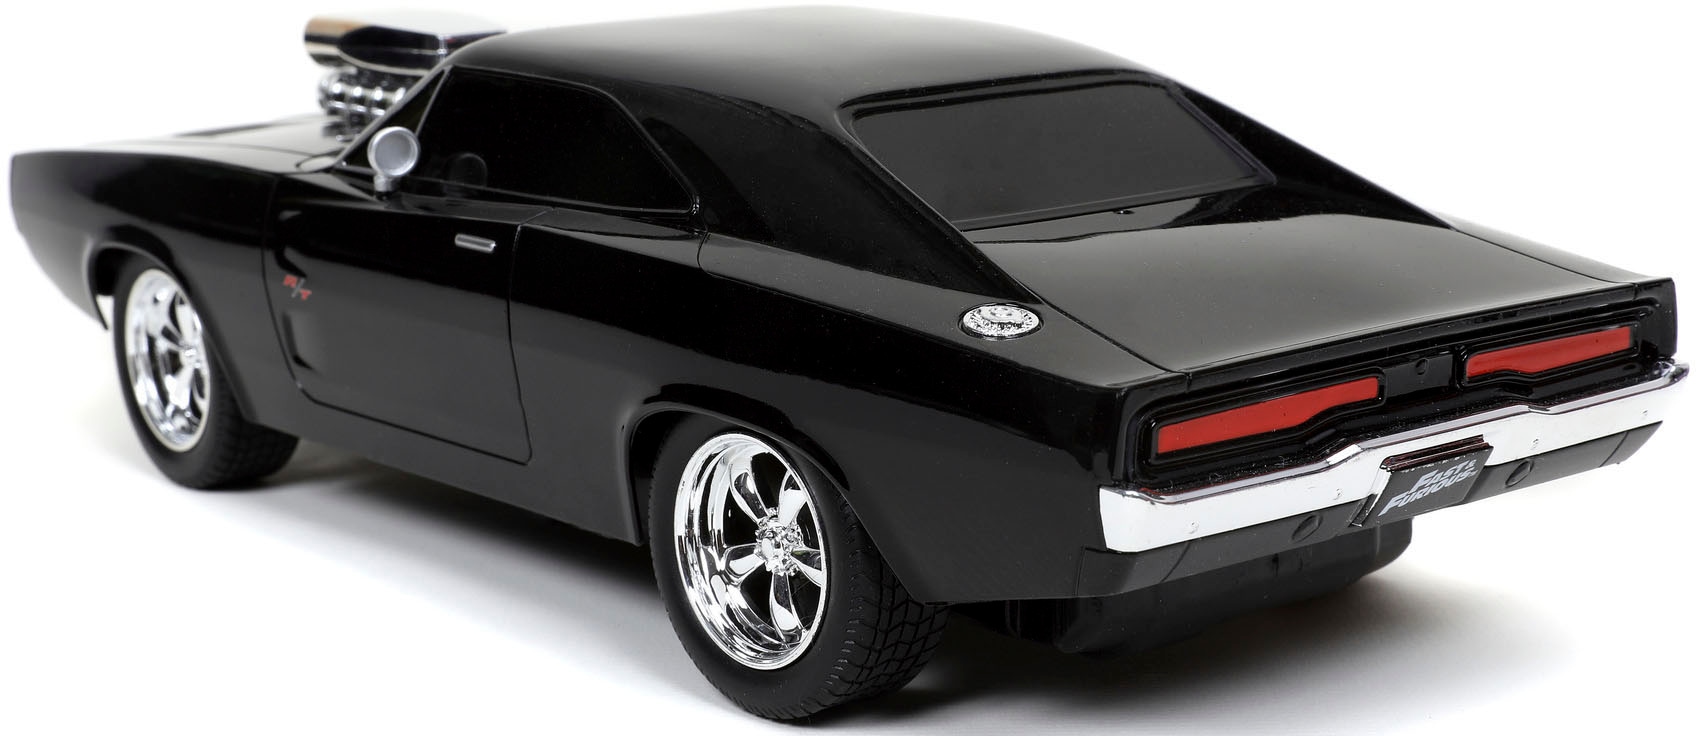 JADA RC-Auto »Fast & Furious, Doms Dodge Charger R/T«